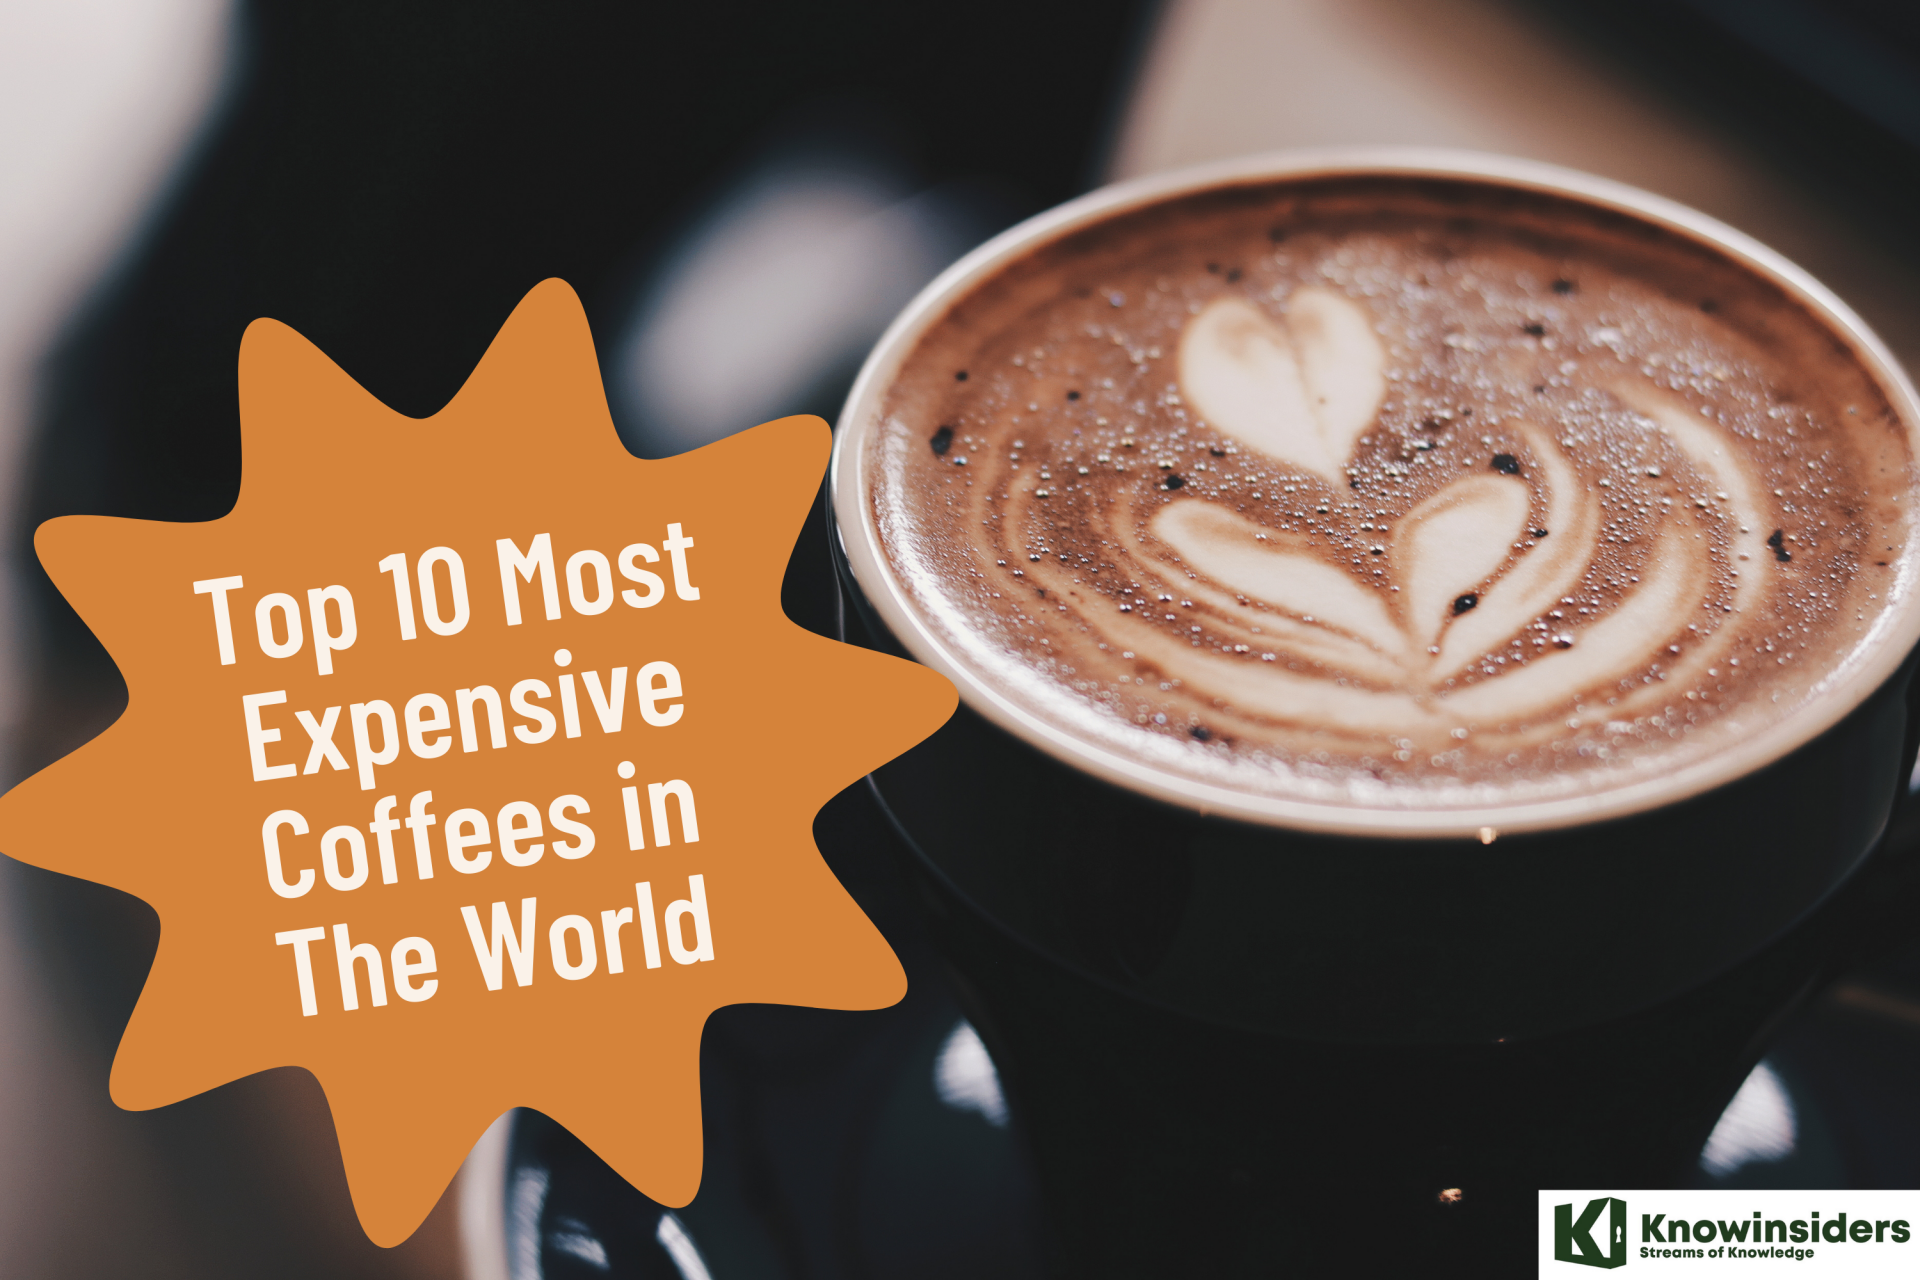 Top 10 Most Expensive Coffees in The World